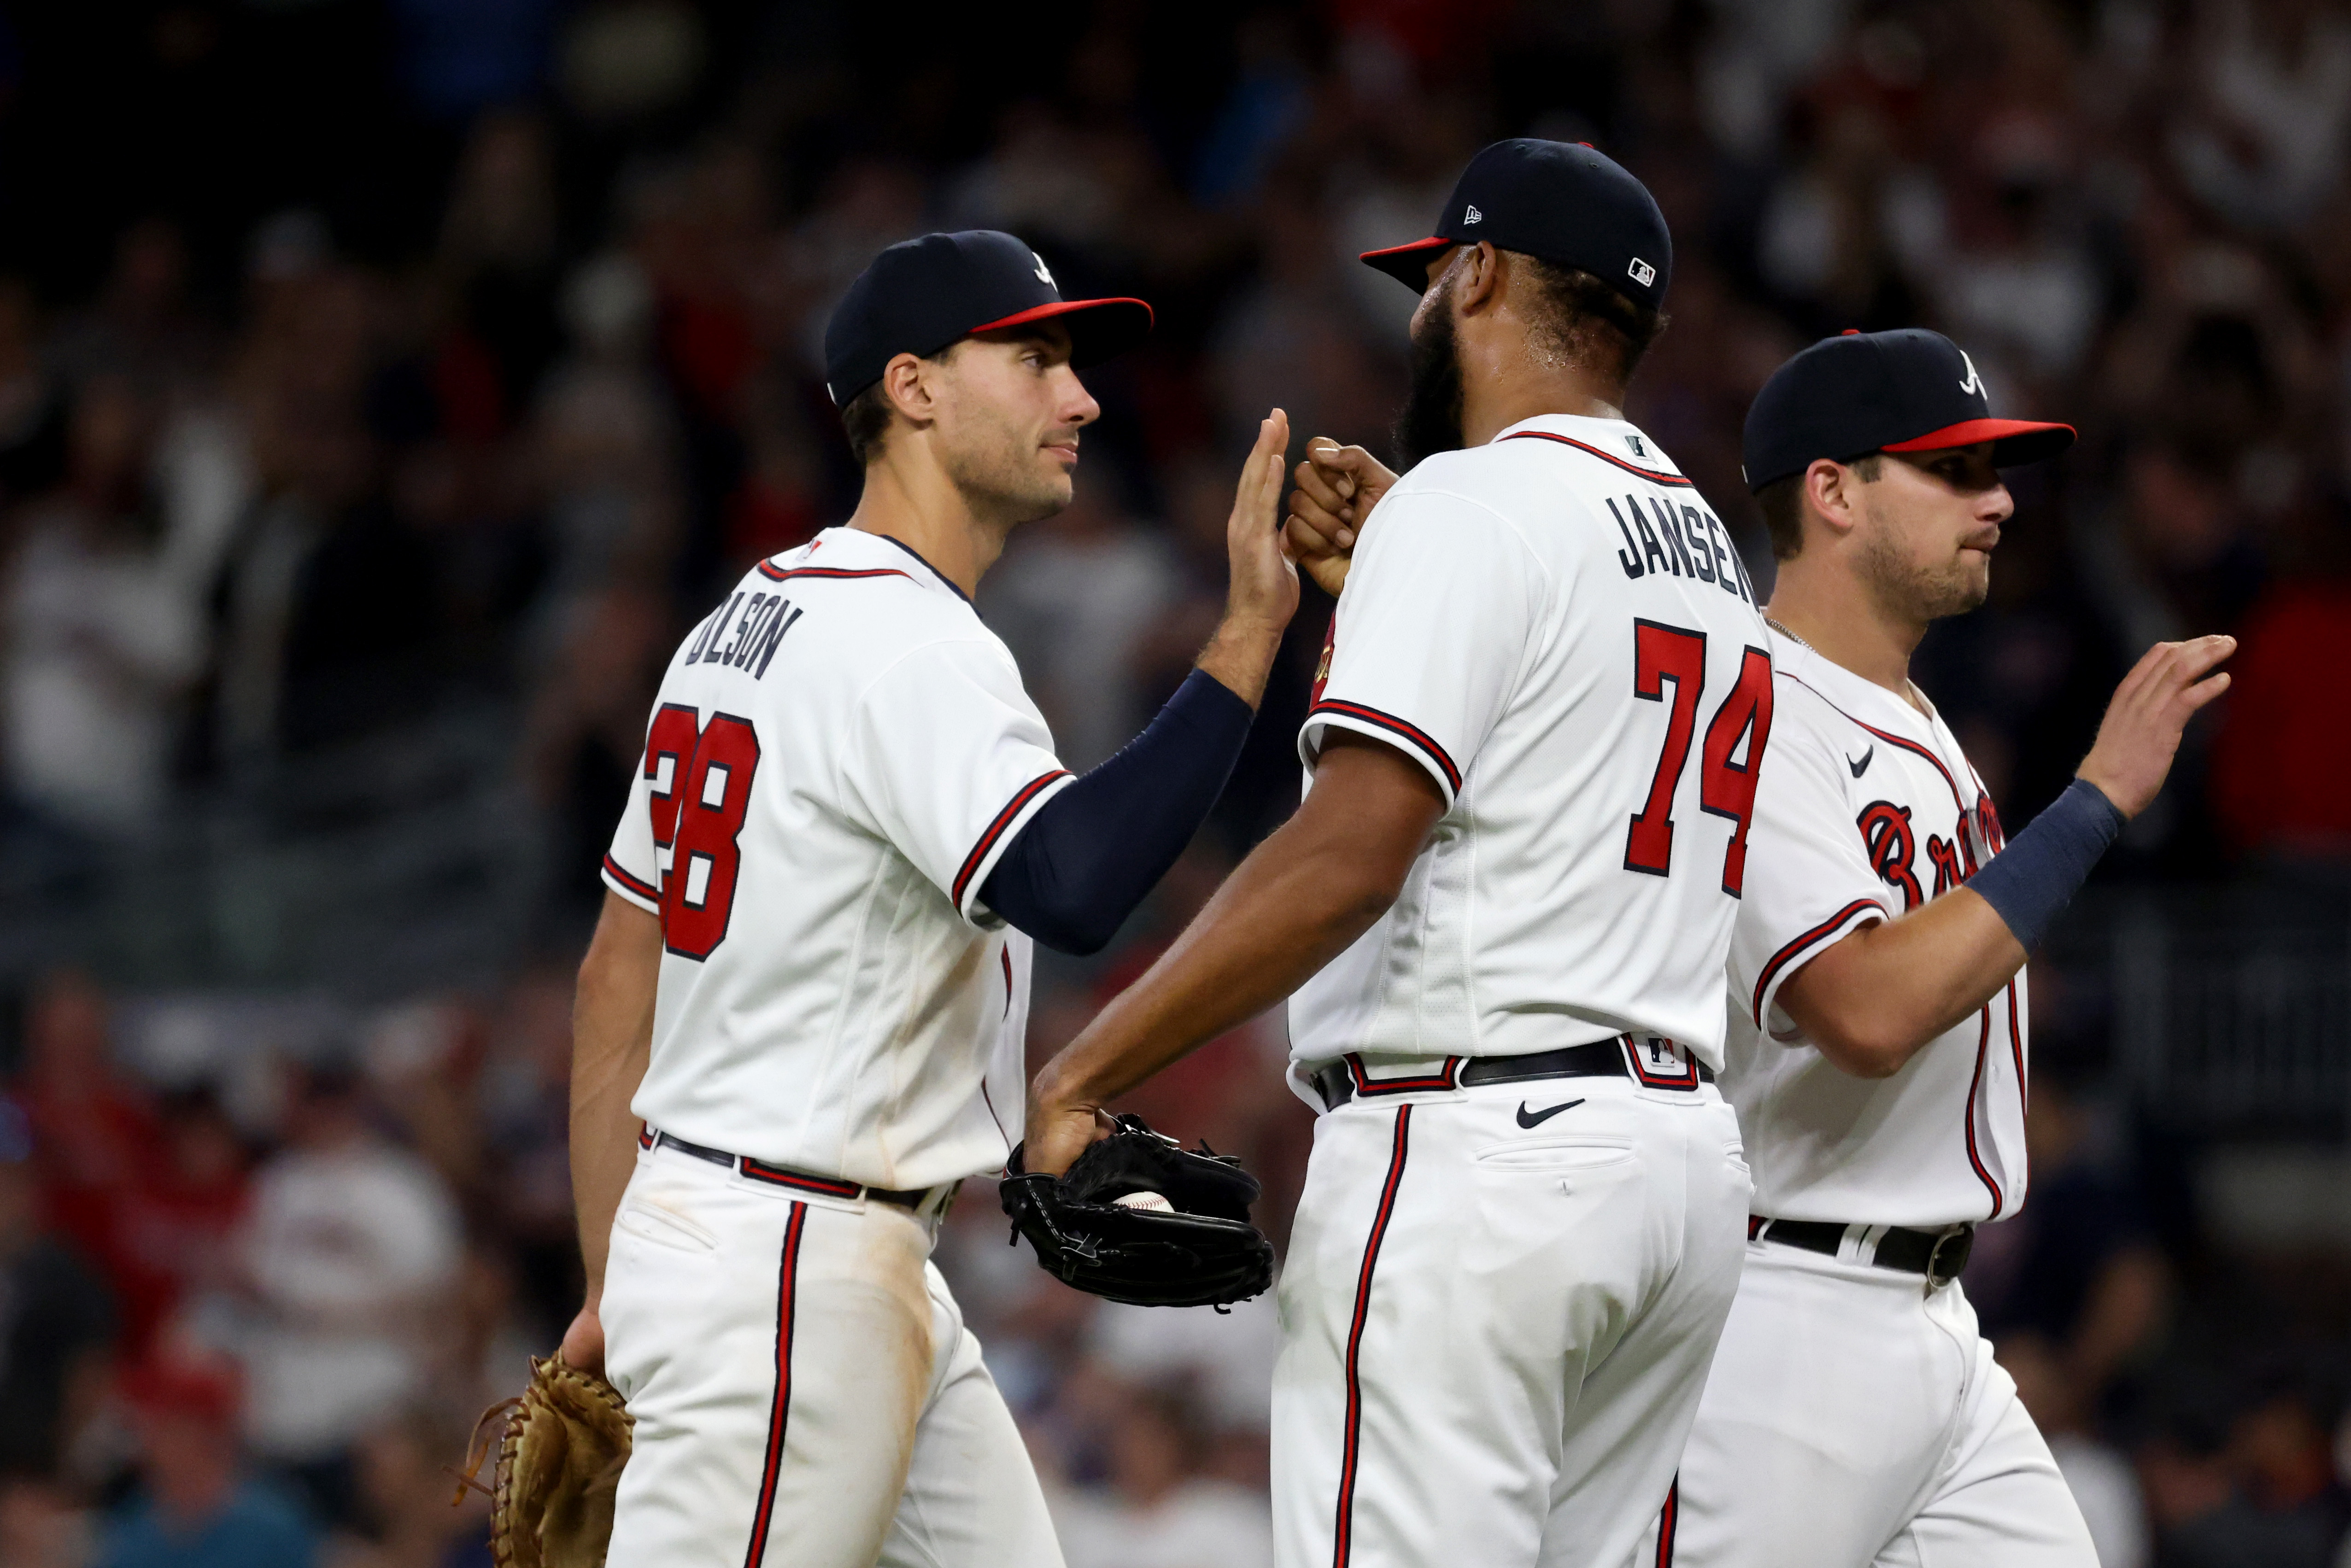 Kyle Wright dazzles with career-best 11 strikeouts as Braves beat Marlins